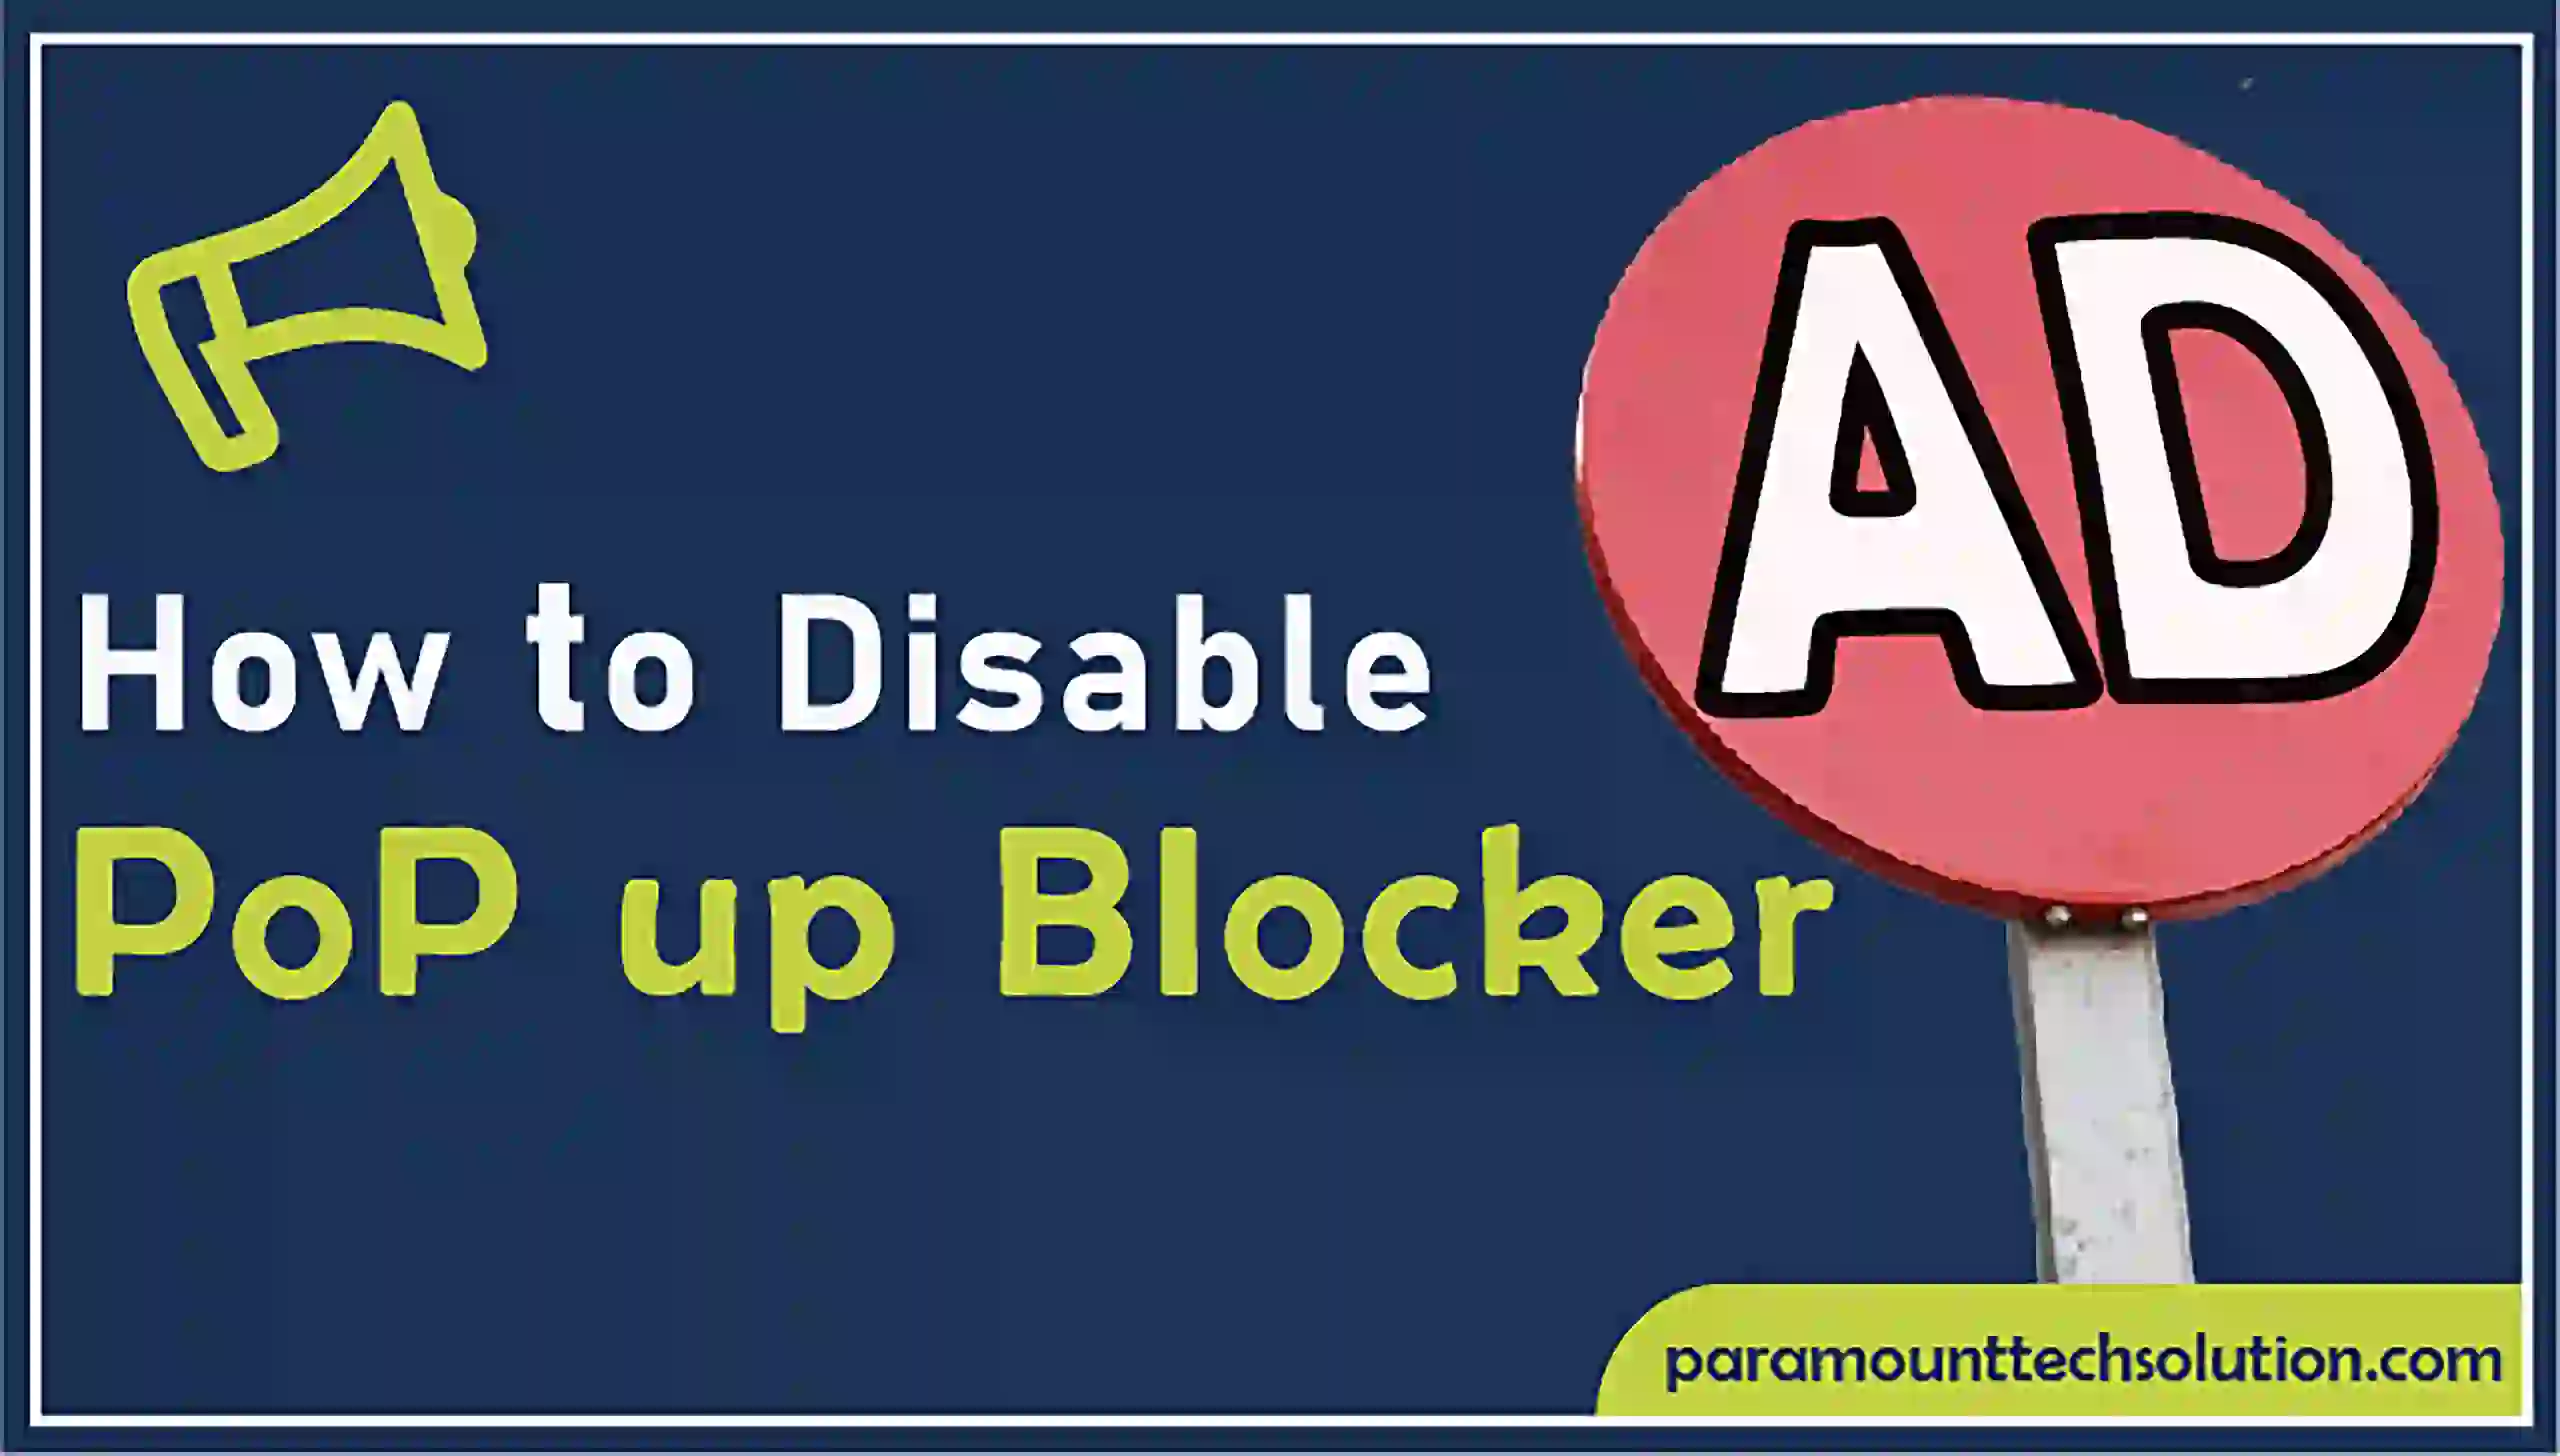 How to Disable Pop up Blocker